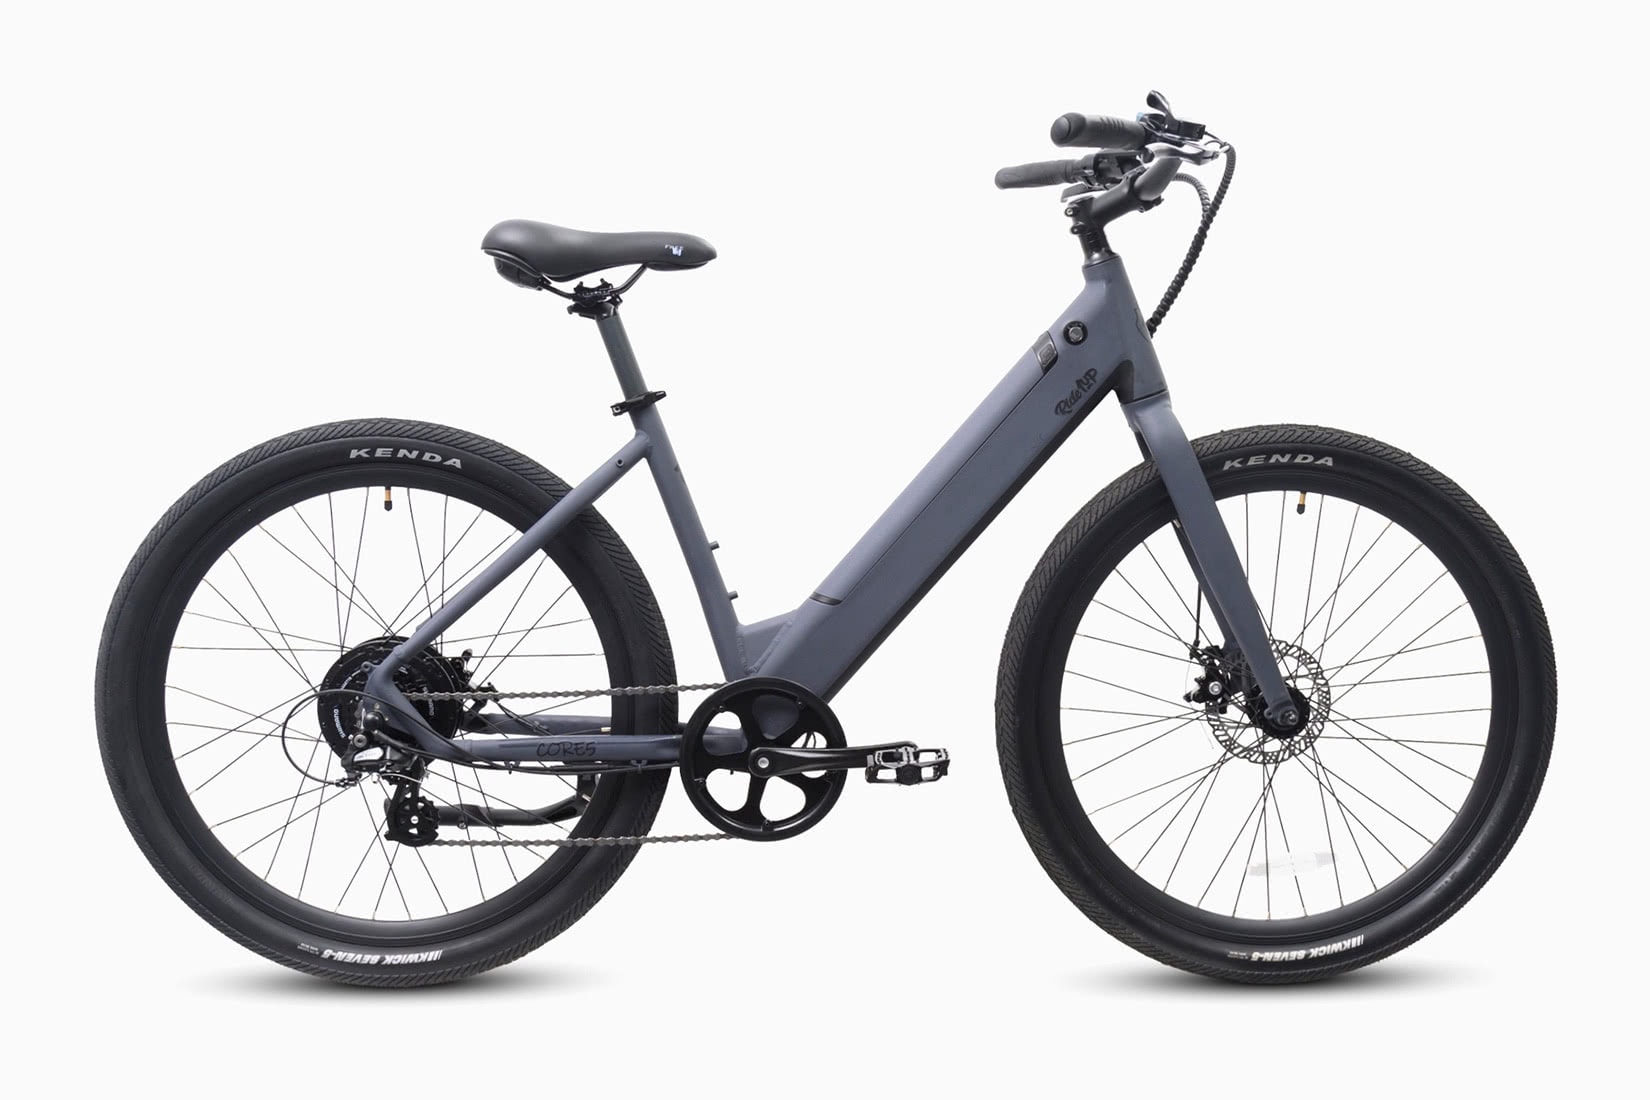 15 Best Electric Bikes Reviewed 2021 Bicycles Buyer’s Guide